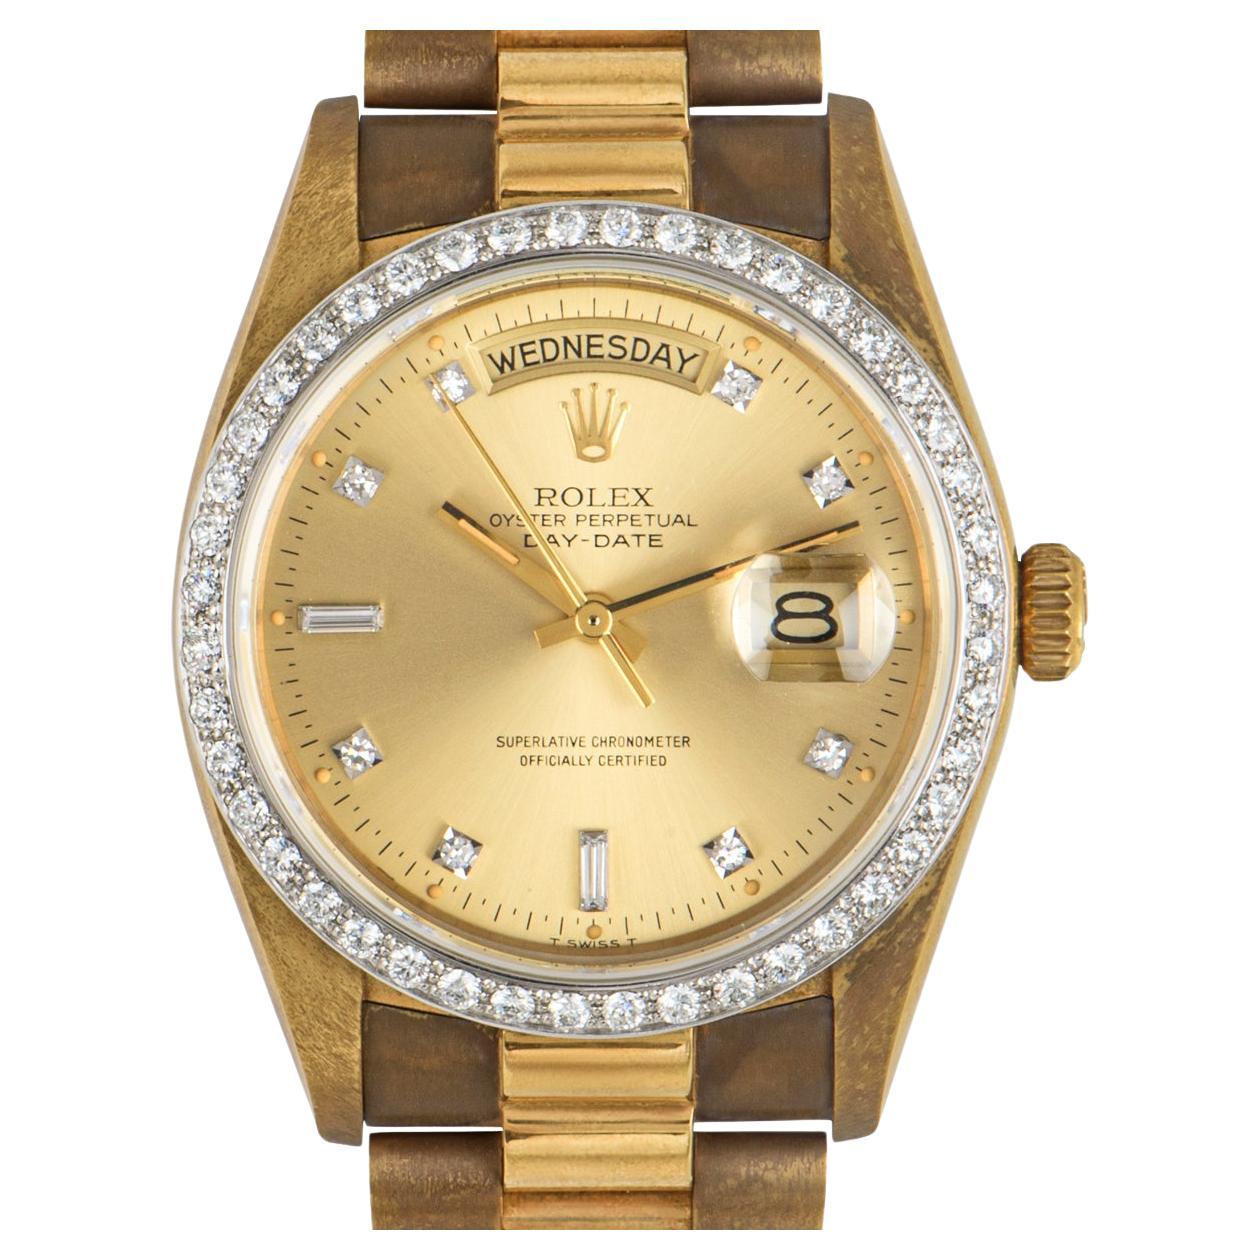 A stunning vintage 36mm Day-Date by Rolex crafted in yellow gold. Featuring a champagne dial with 8 round brilliant cut diamonds and 2 baguette cut diamond hour markers, as well as a yellow gold fixed bezel set with 44 round brilliant cut